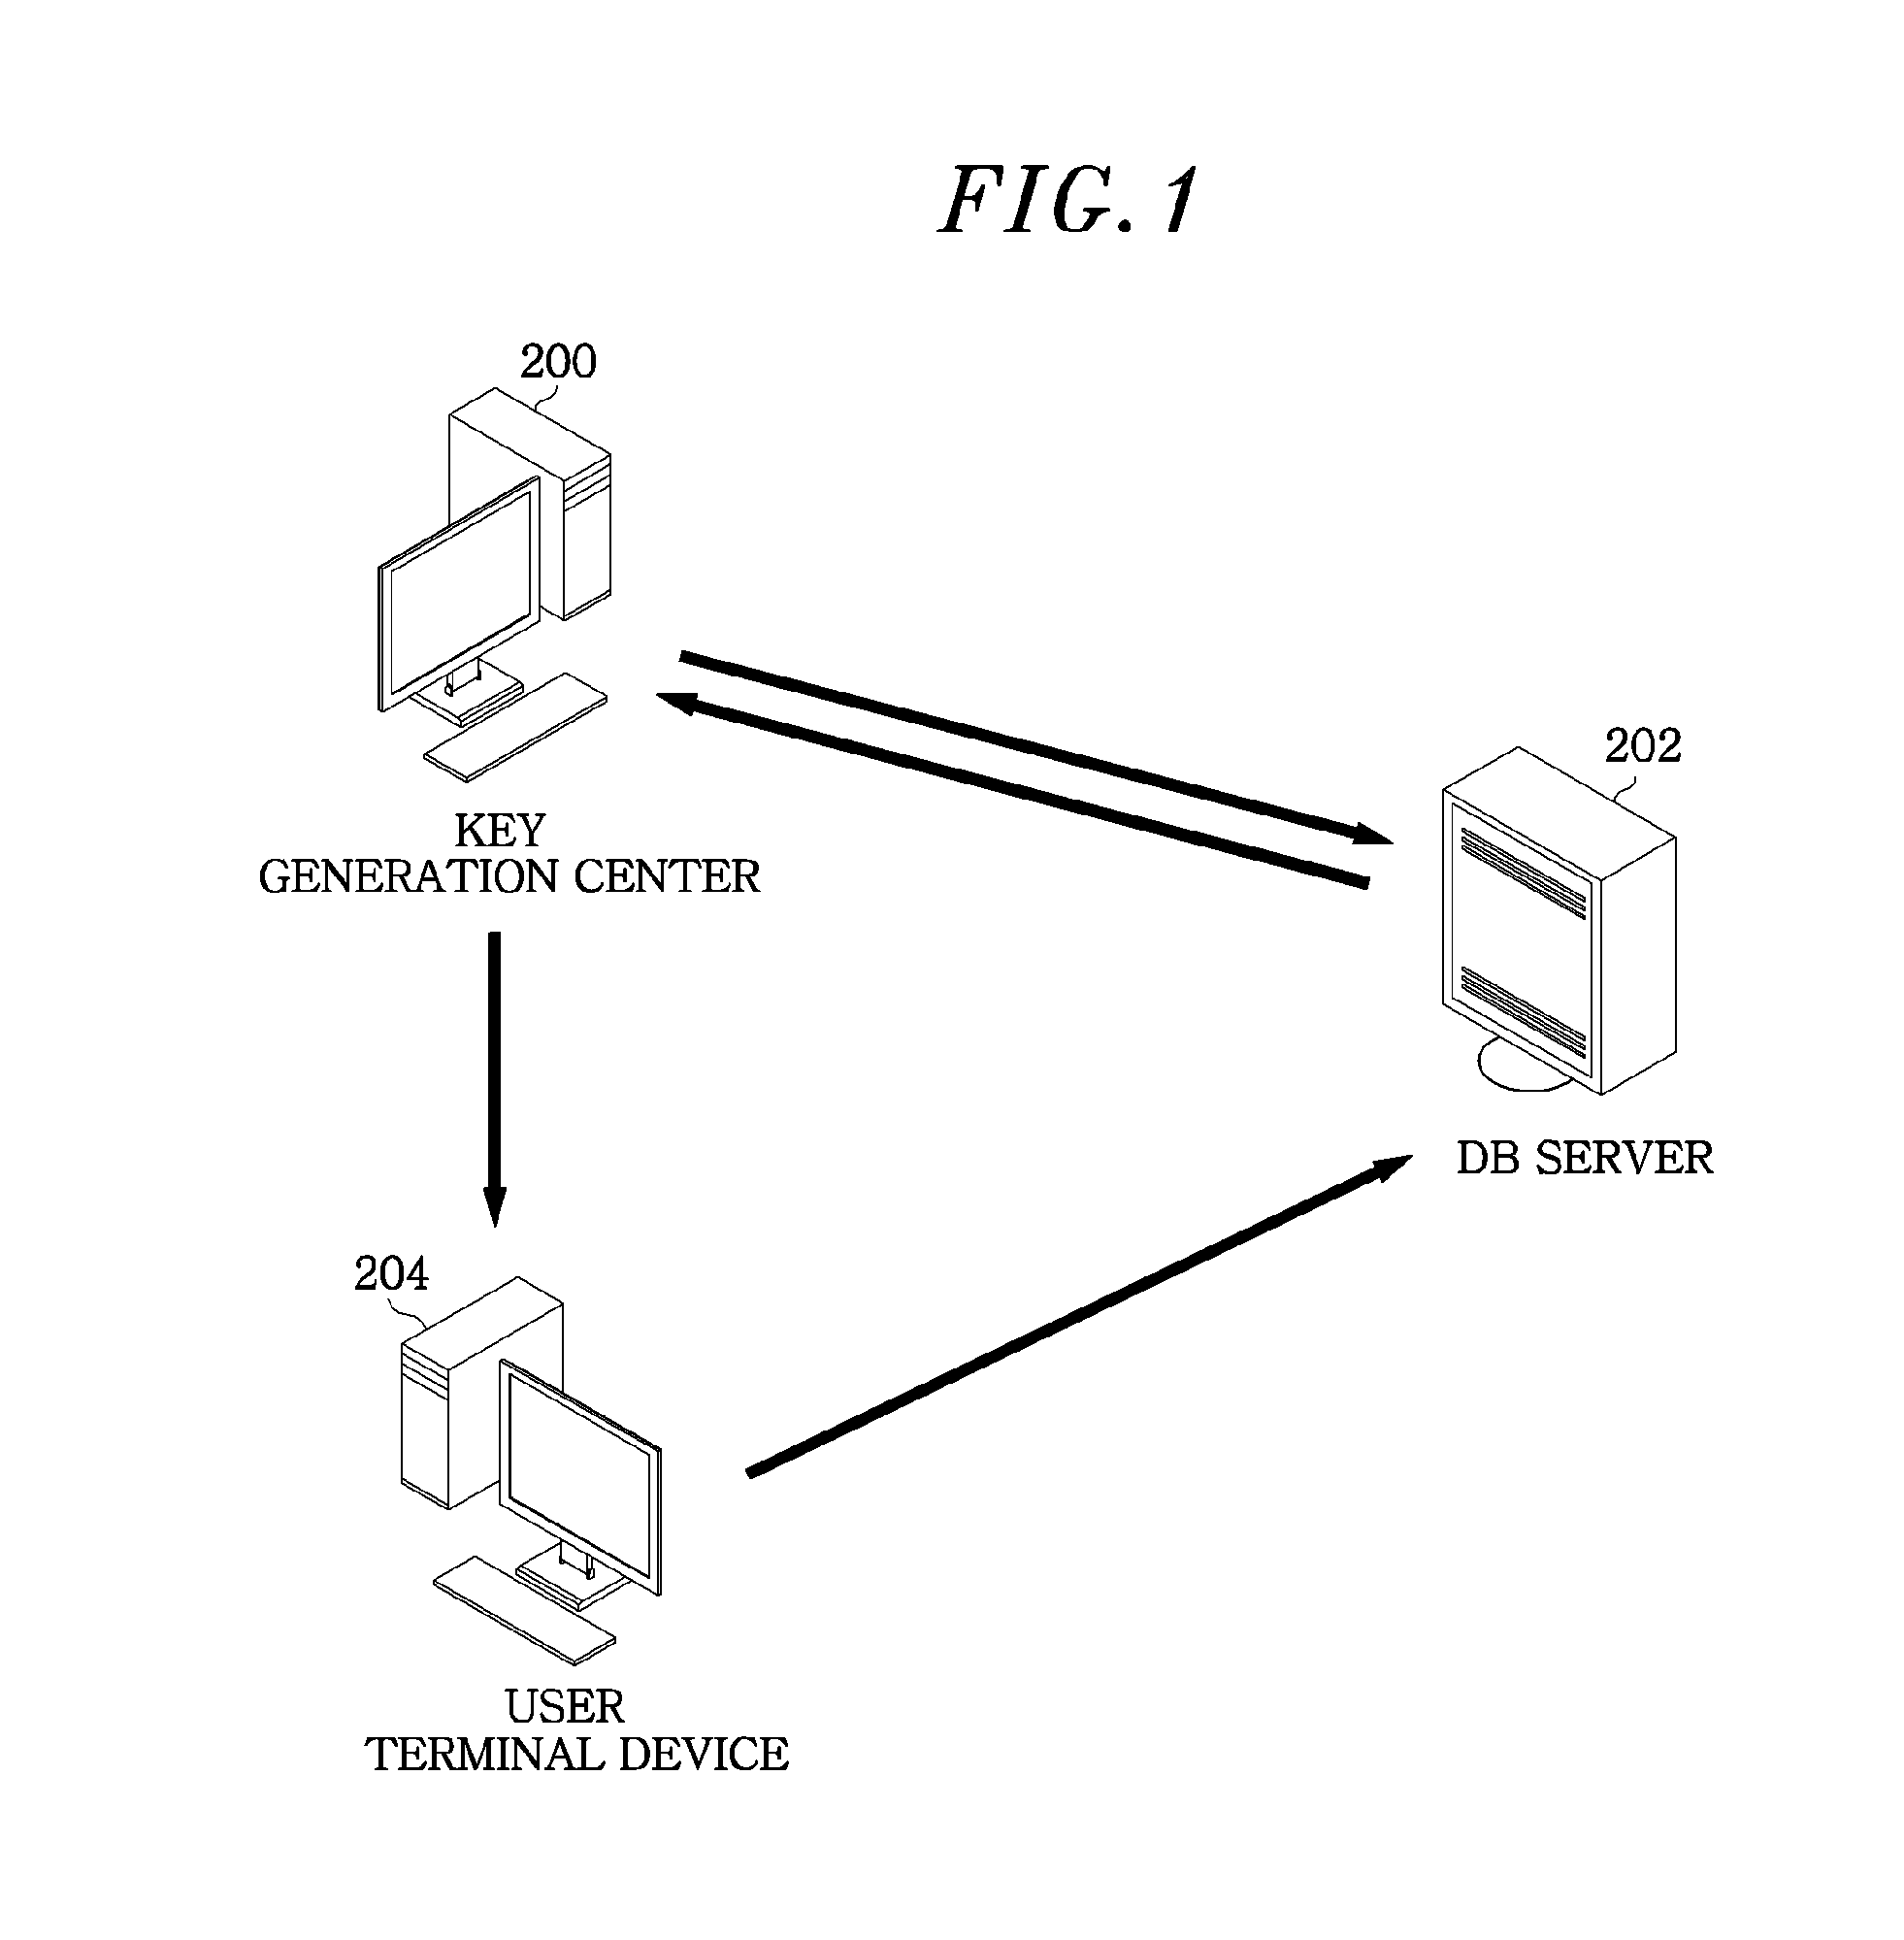 Multi-user searchable encryption system and method with index validation and tracing